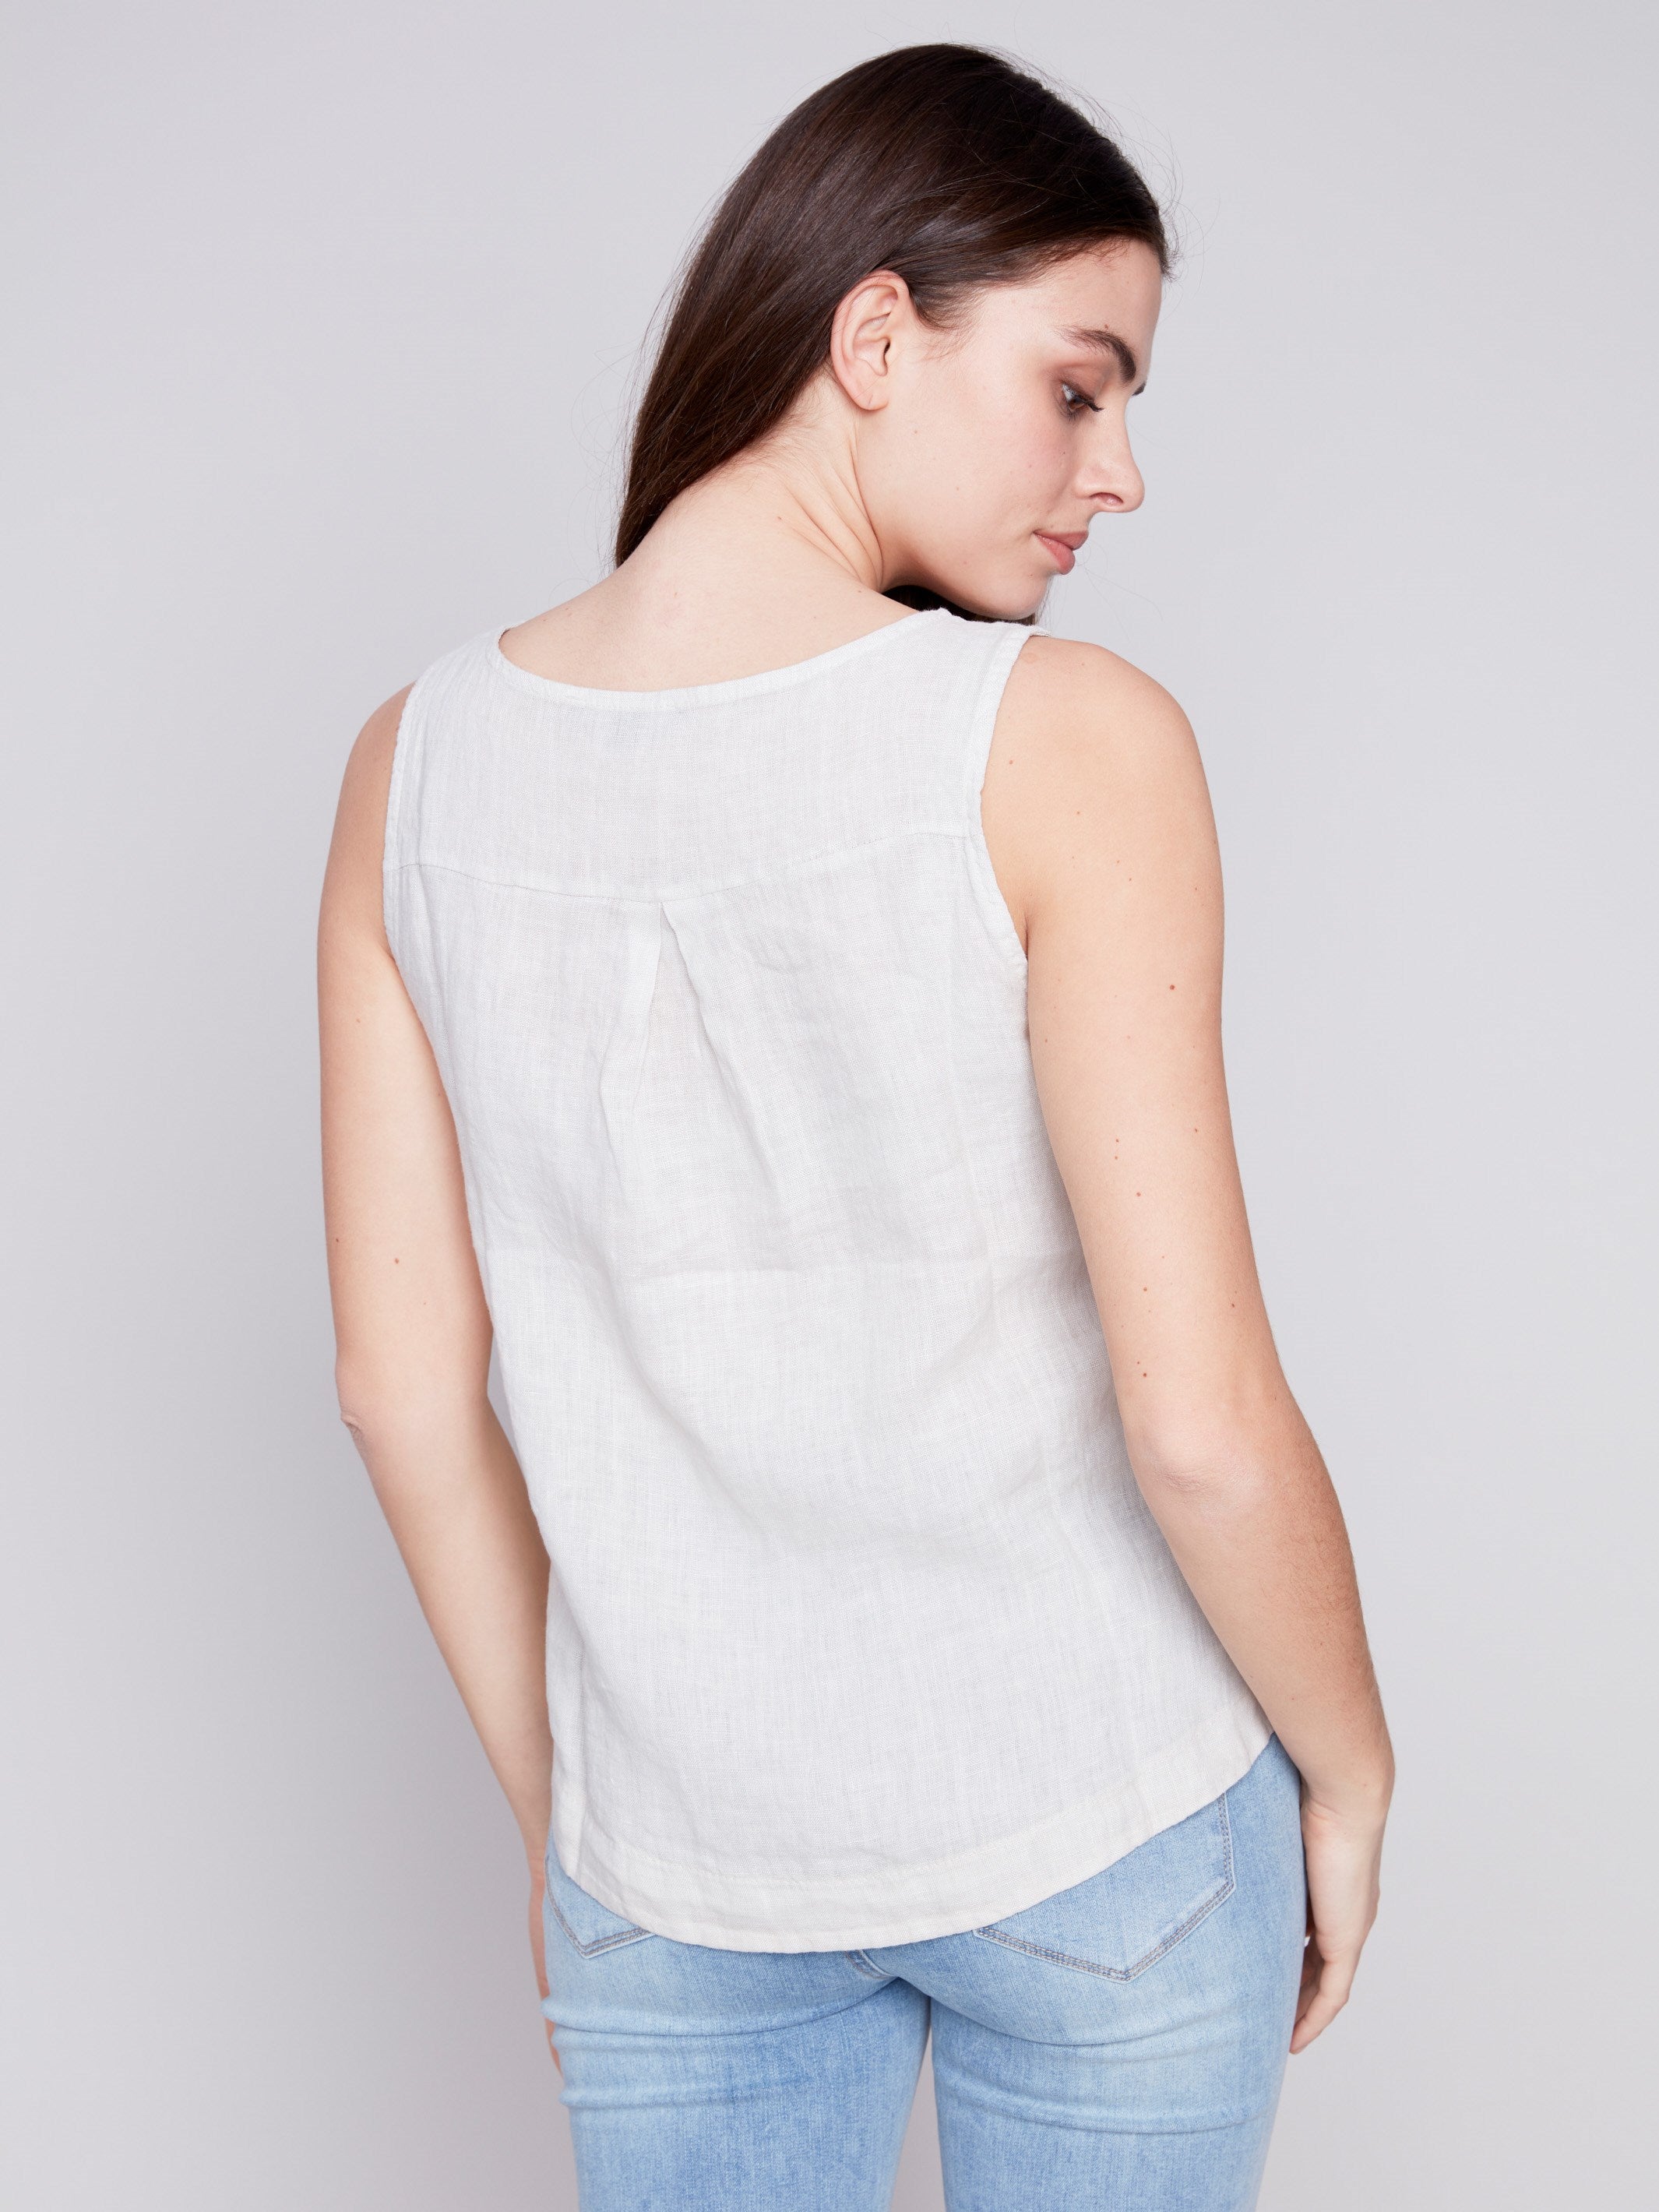 Sleeveless Linen Top with Side Buttons - Natural - Charlie B Collection Canada - Image 4